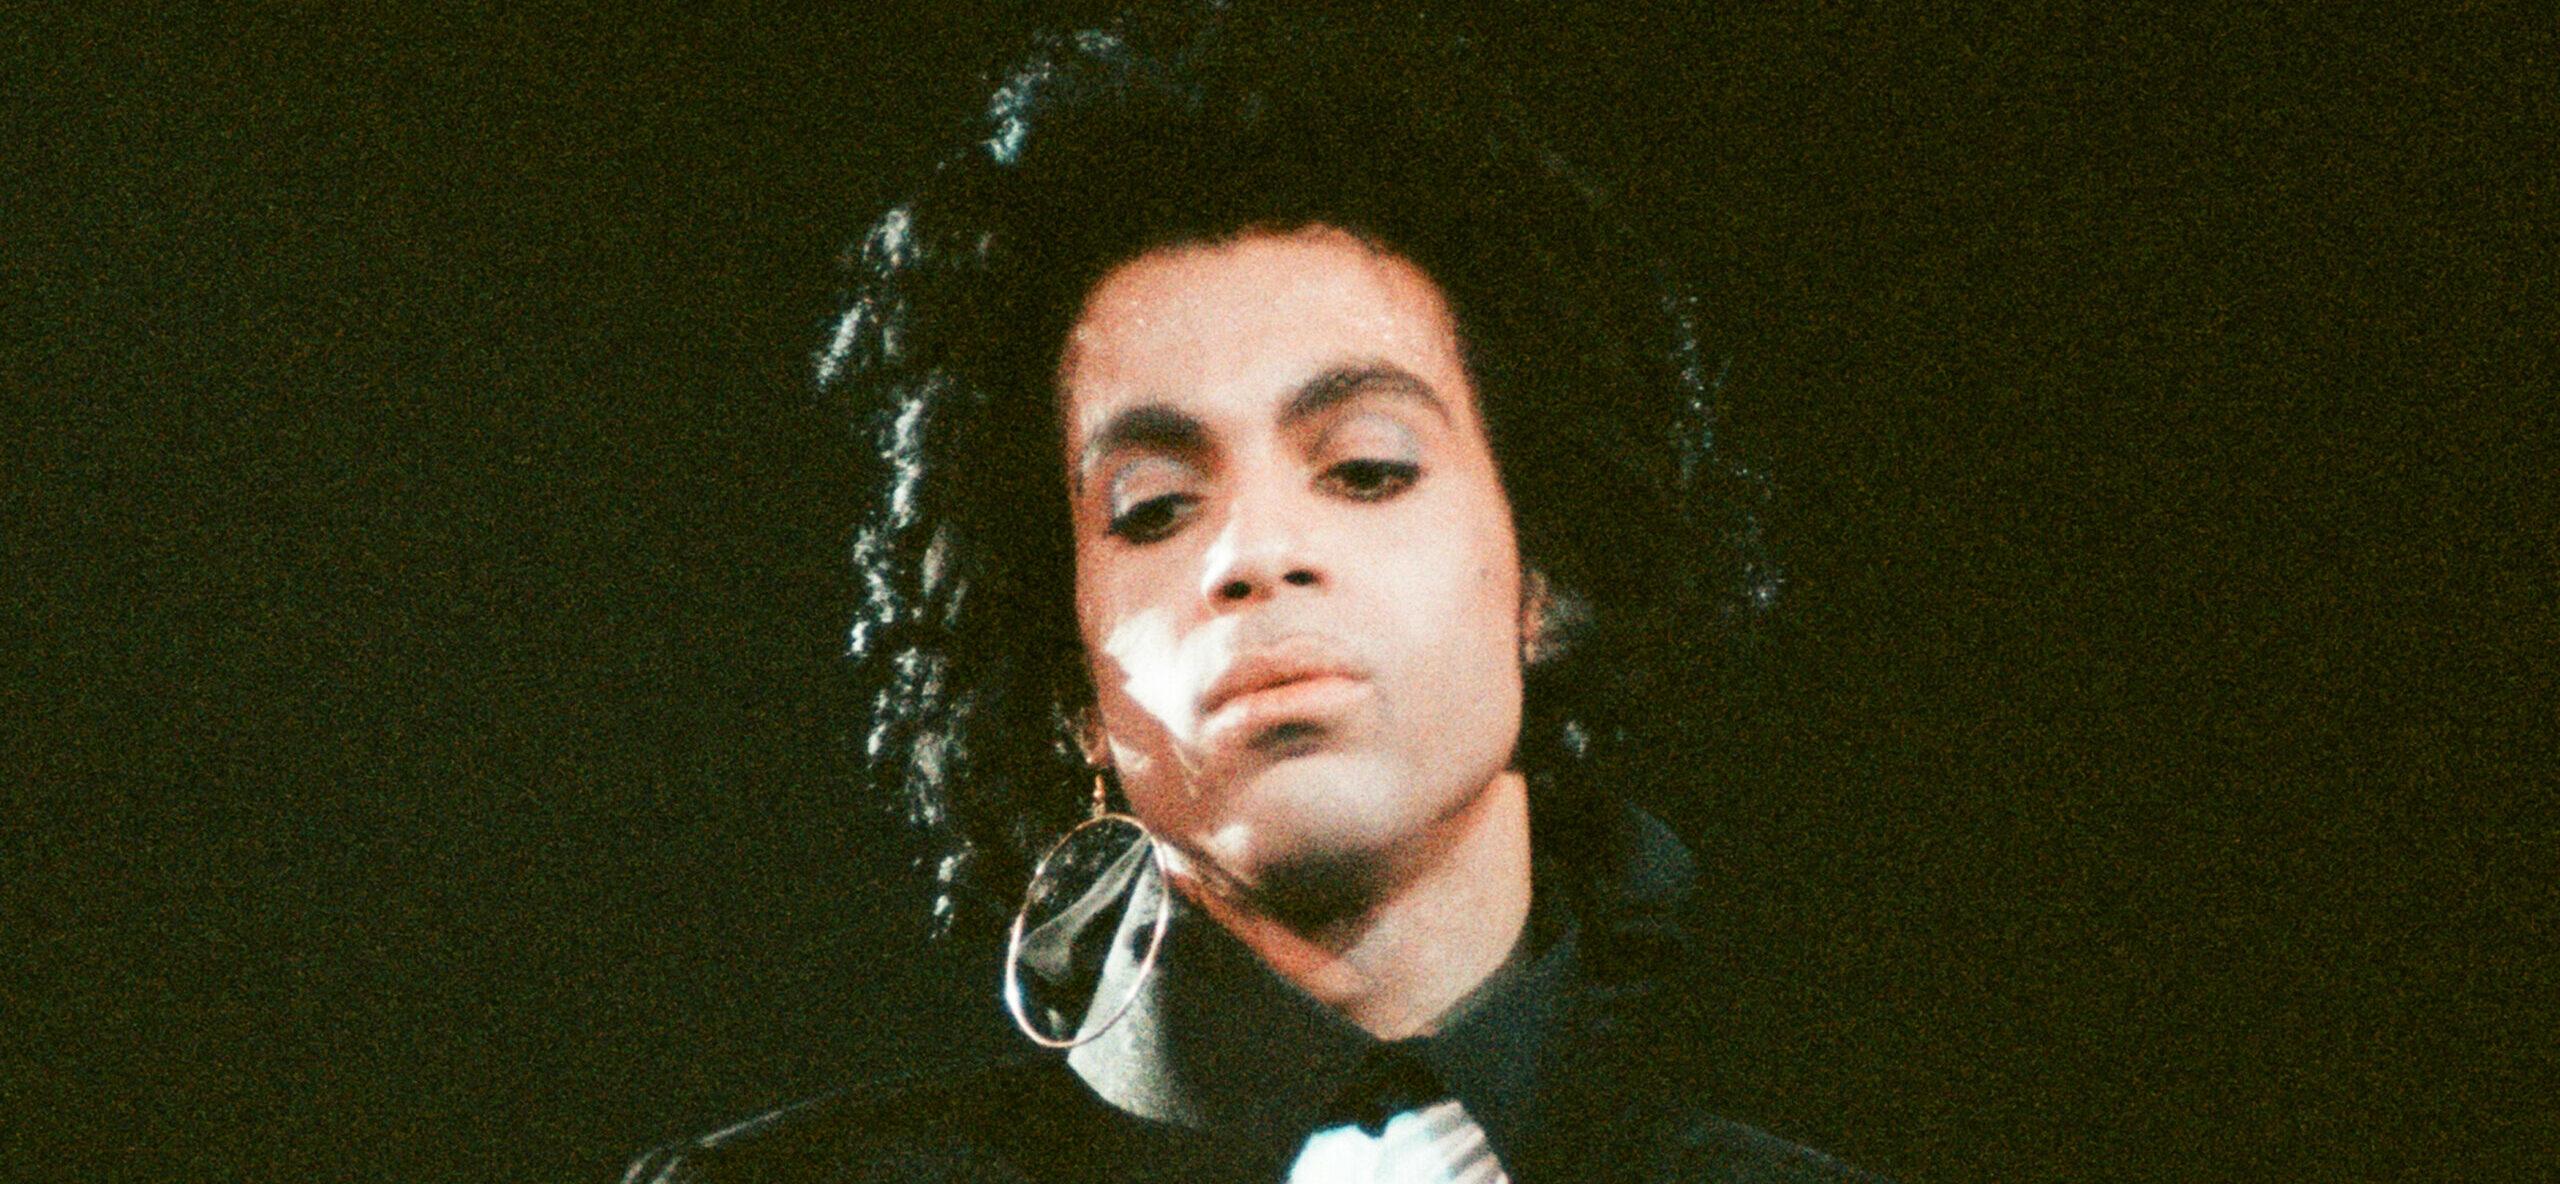 Prince in a black long-sleeve T-shirt with a white scarf around his neck.